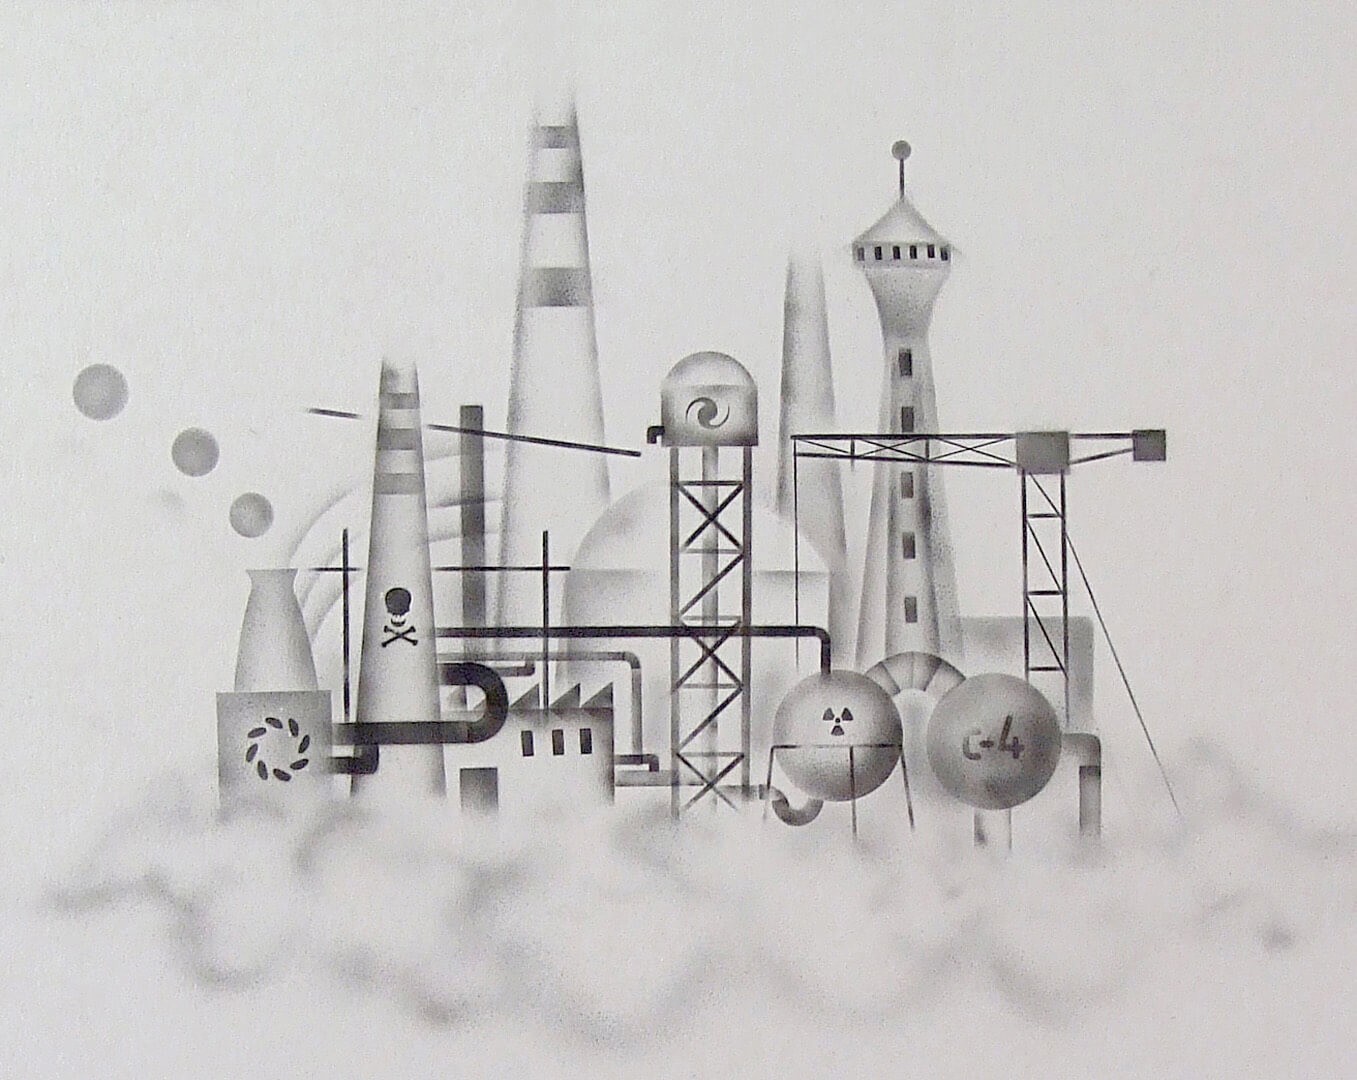 Factory 3, 100 x 70 cm, ink on paper, 2009.